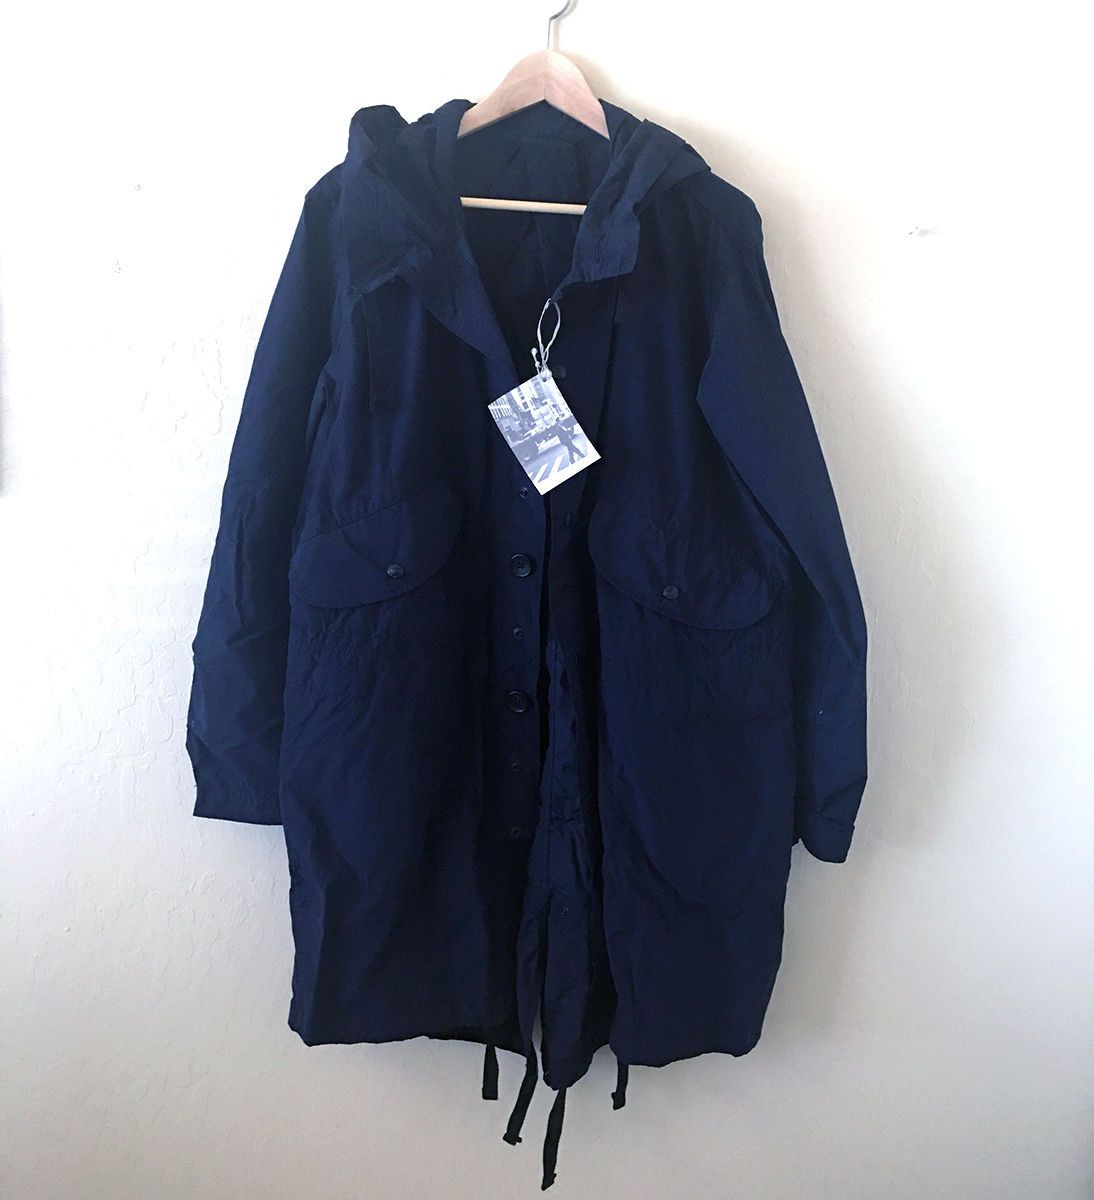 Engineered Garments Type 51 Fishtail Nyco Parka | Grailed